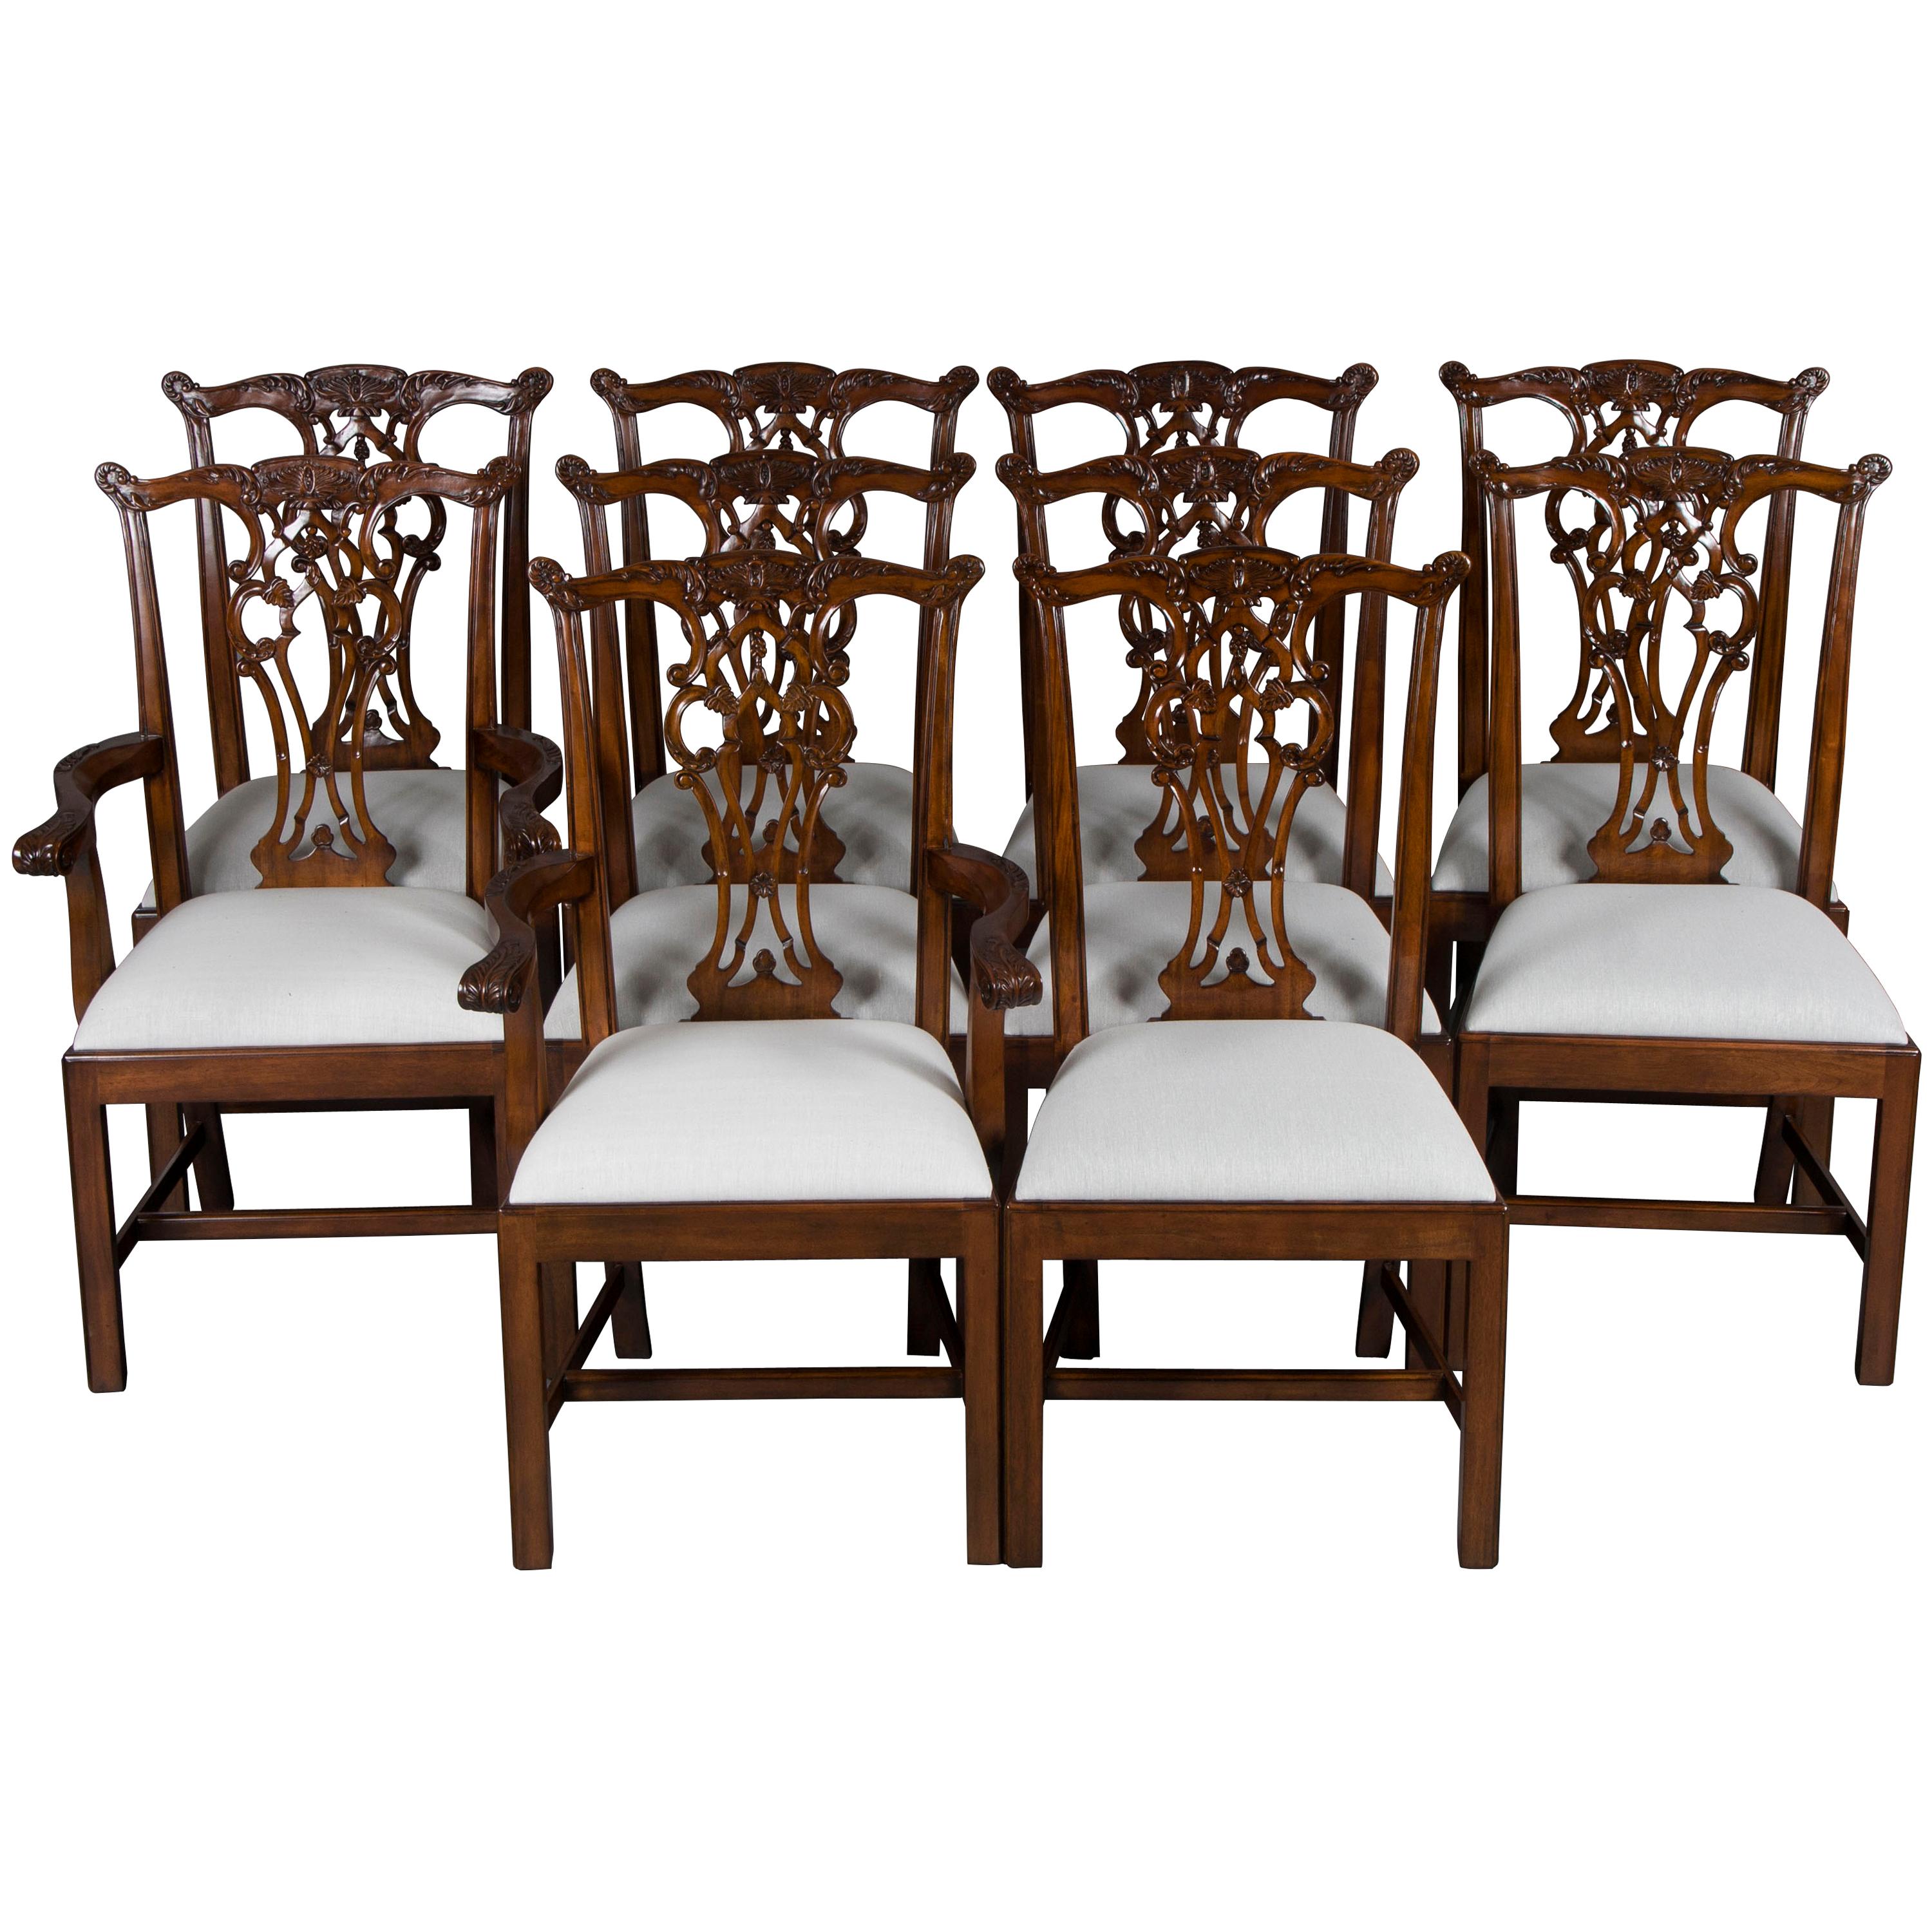 Set of Ten Carved Mahogany Chippendale Style Mahogany Dining Room Chairs